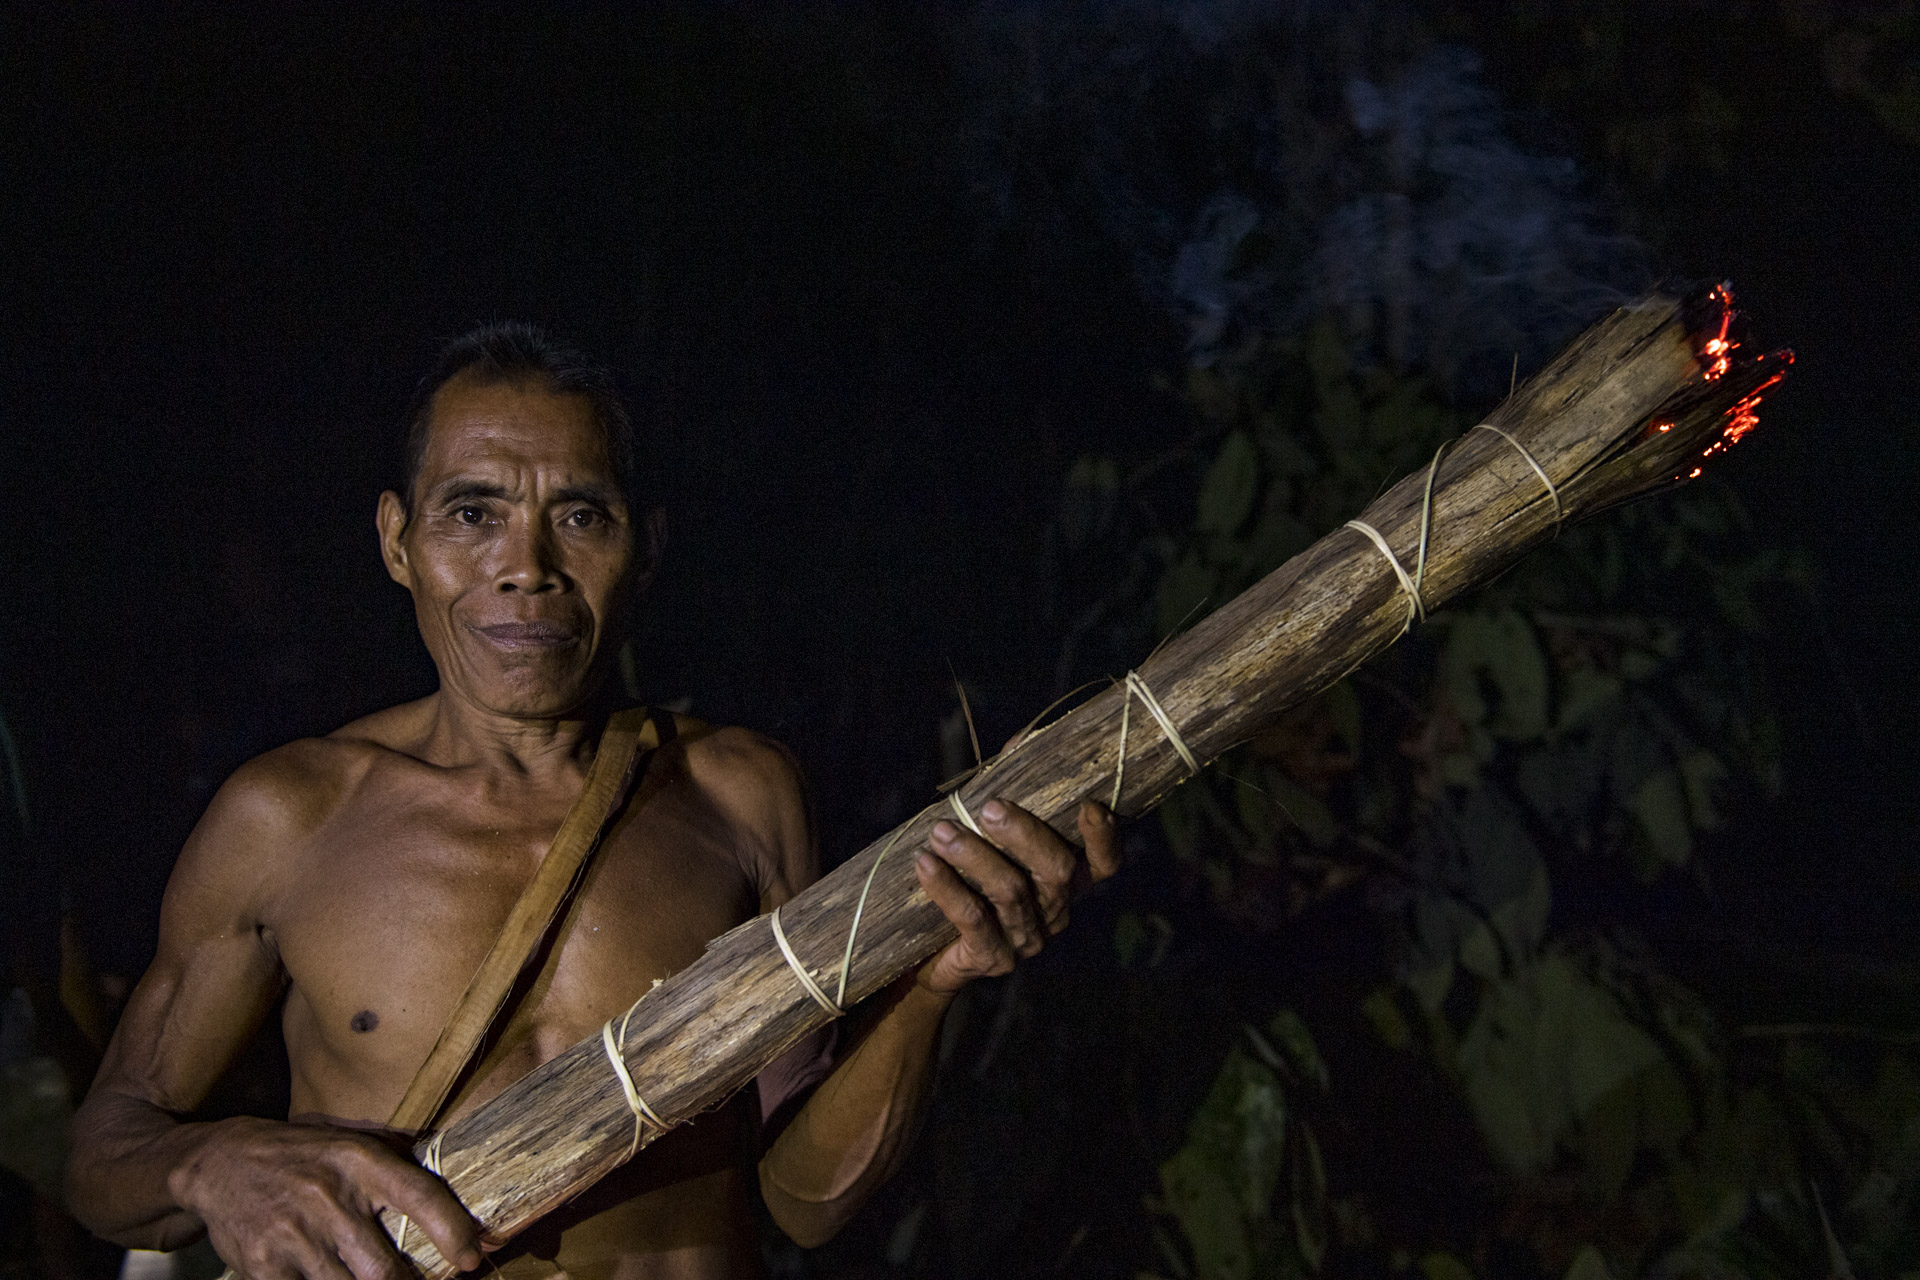 A honey farmer with a smoke torch from the Talang Mamak tribe. The Talang Mamak tribe is one of the tribes whose livelihood is embedded with the forest resources since long time ago through hunting and gathering the forest products. These products will be consumed for their own family or communal. Talang Mamak are spread around Bukit Tigapuluh which is administratively located in Batang Gangsal, Kelayang, and Renga Barat subdistrict as well as Indragiri Hulu district, Riau Province. One of the groups lives in Semerantihan hamlet, Suo-Suo Village, Batang Sumai, Tebo district, Jambi Province.